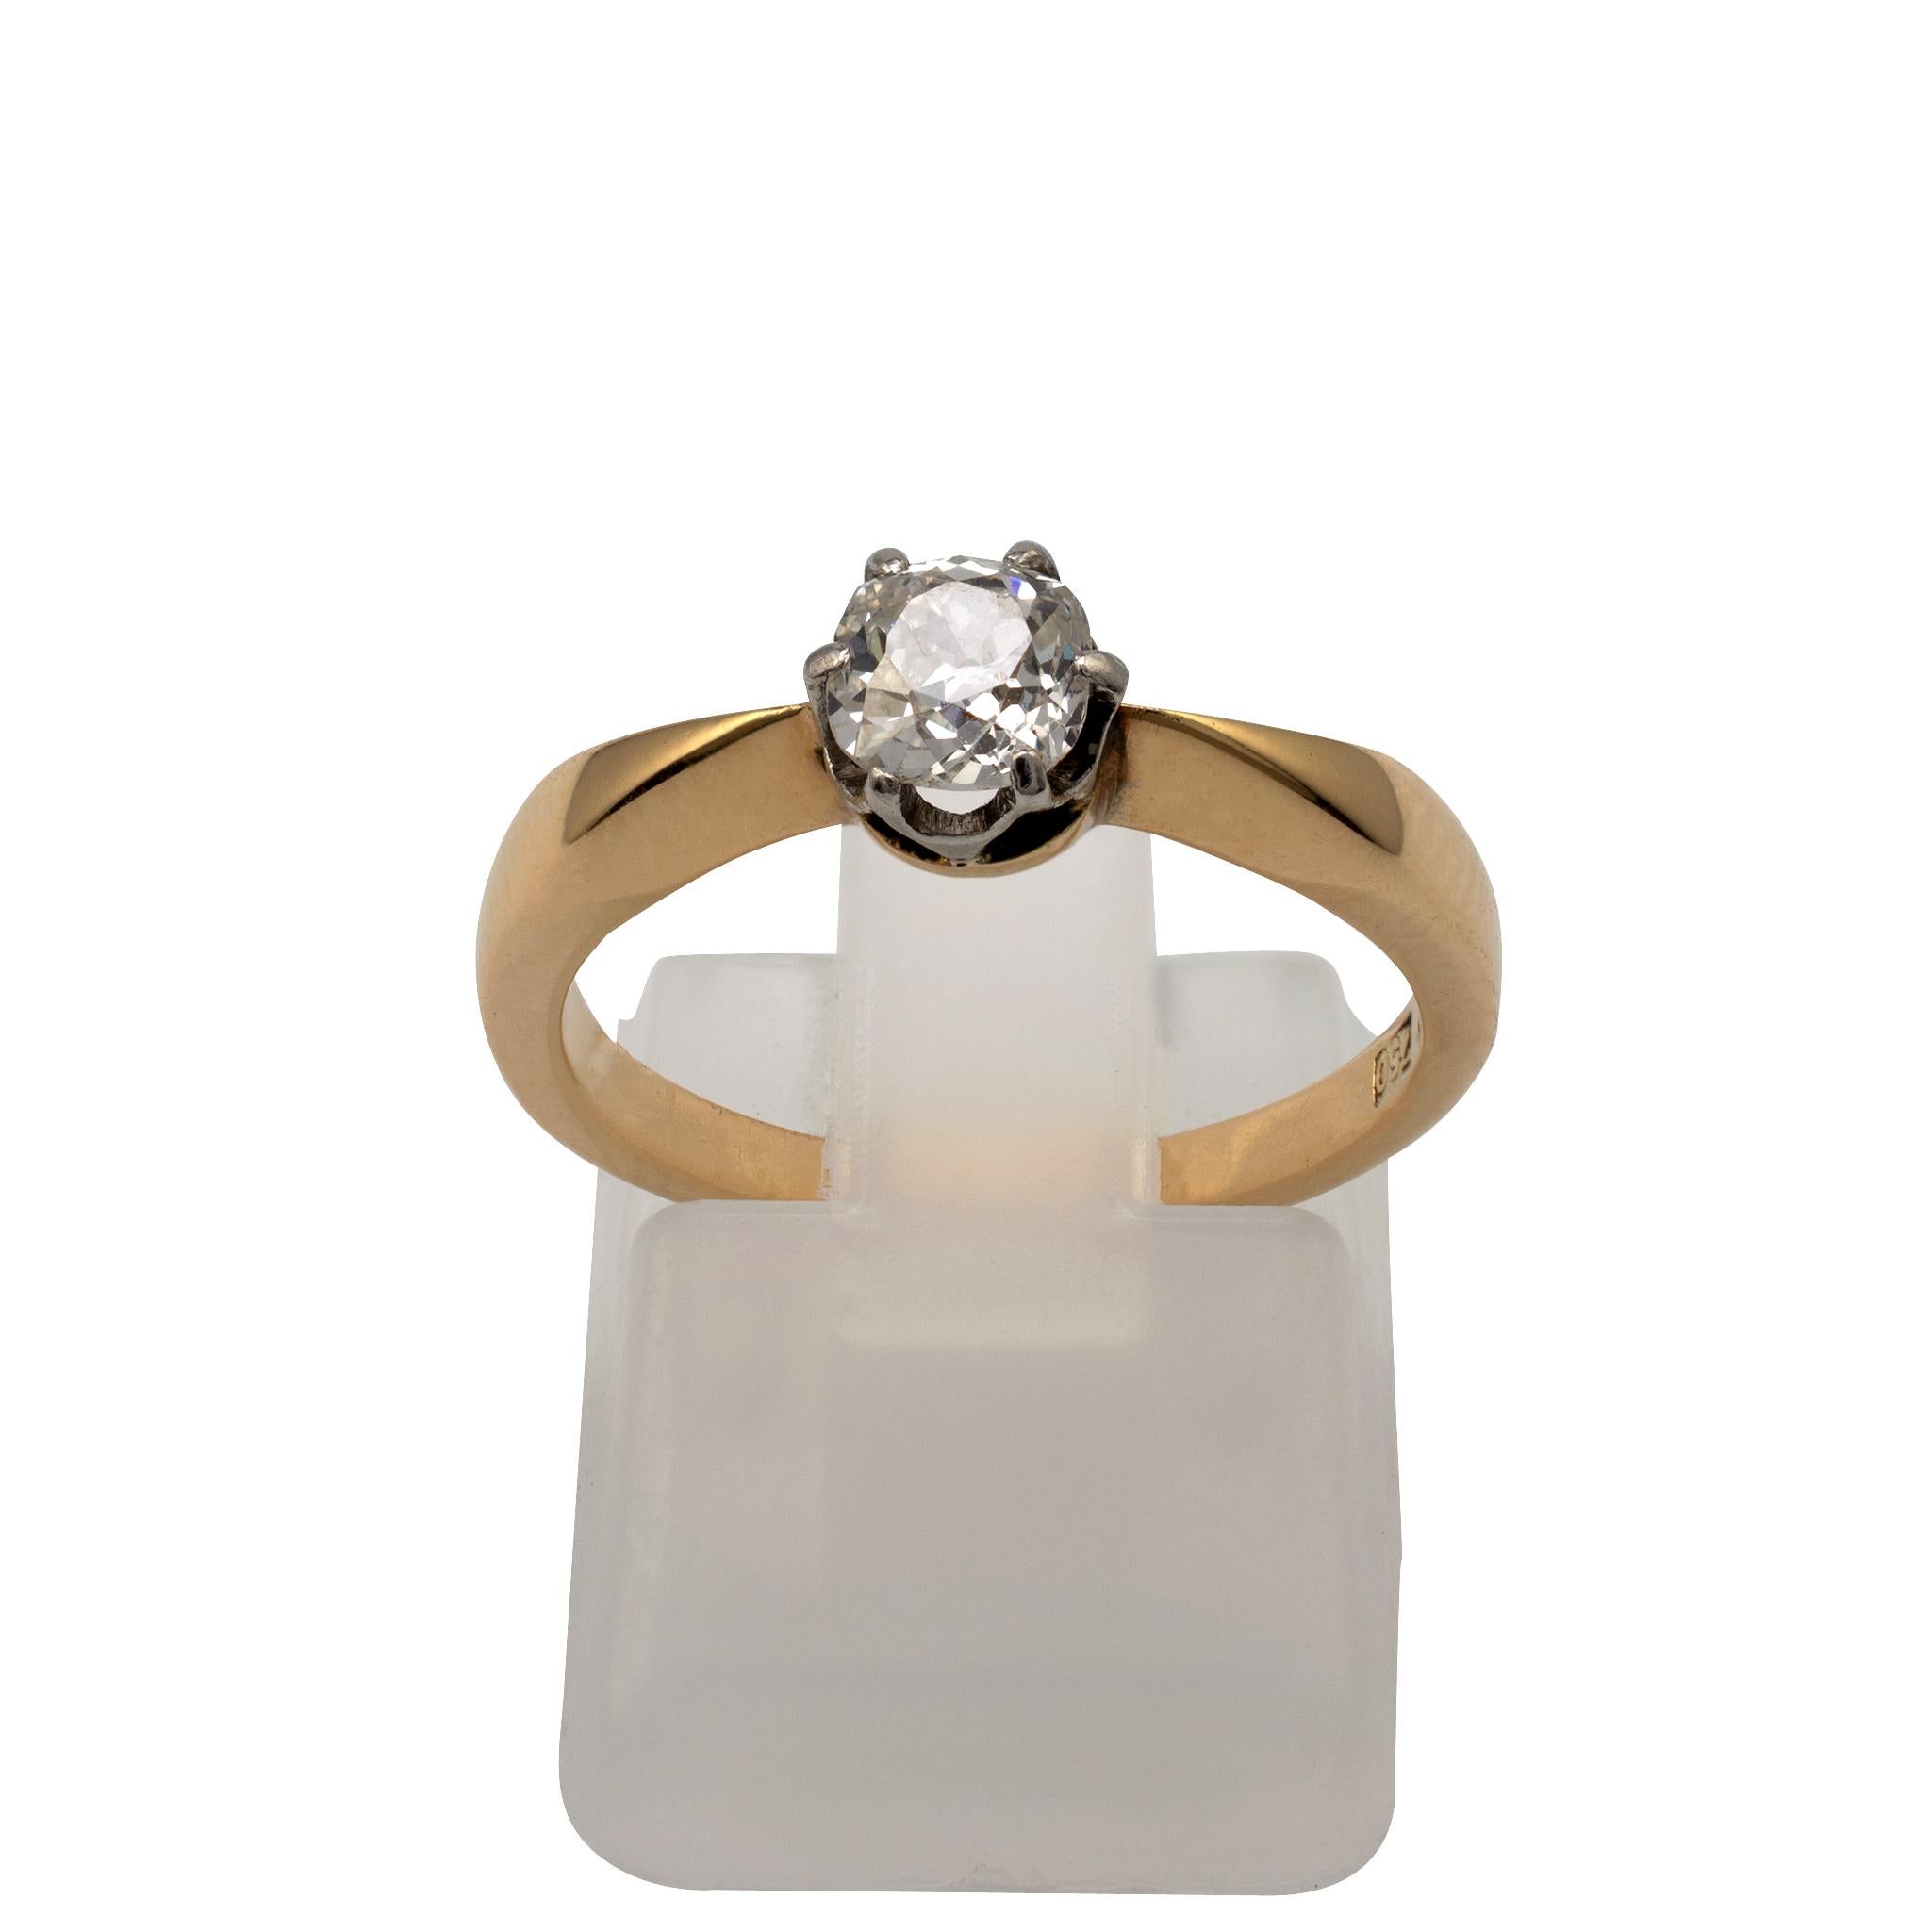 Diamond Solitaire Engagement Ring 0.50 Carat Old Cut, 18 Karat Gold, circa 1970s For Sale 4